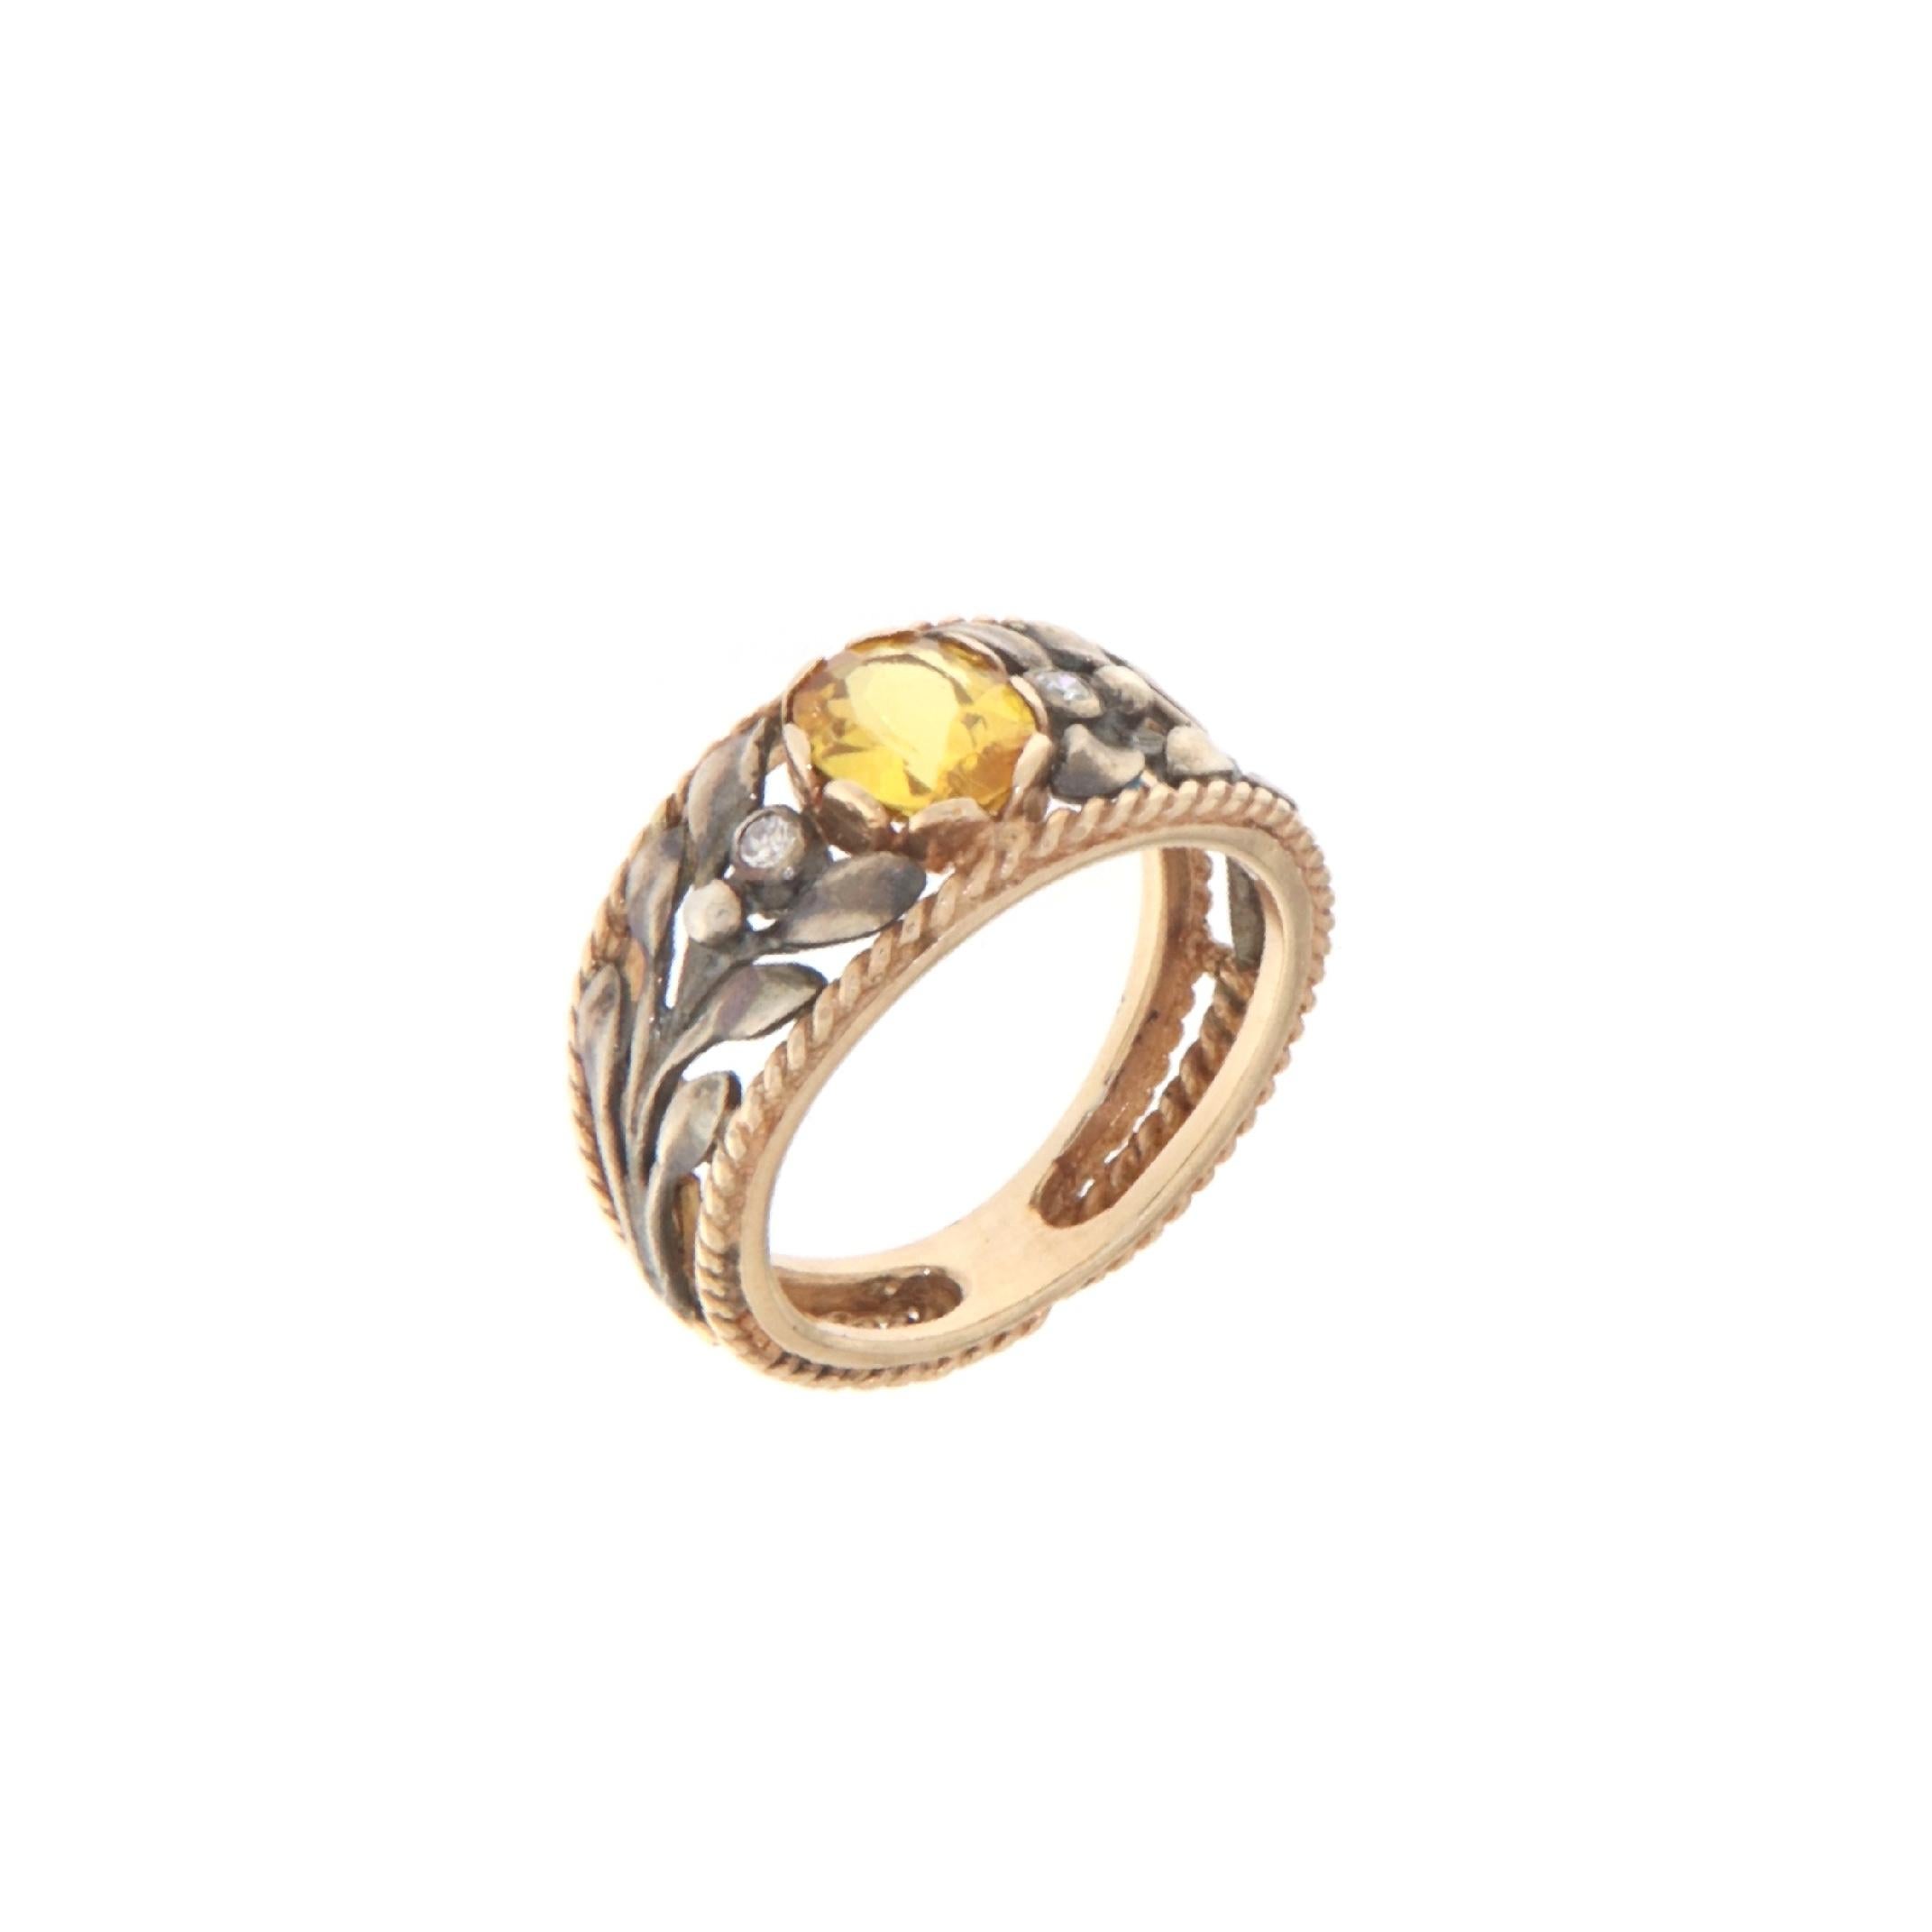 This captivating ring beautifully melds the warmth of 14-karat yellow gold with the luster of 800 silver, presenting a design that’s both traditional and contemporary. The centerpiece is a radiant yellow sapphire, its golden hue reminiscent of the